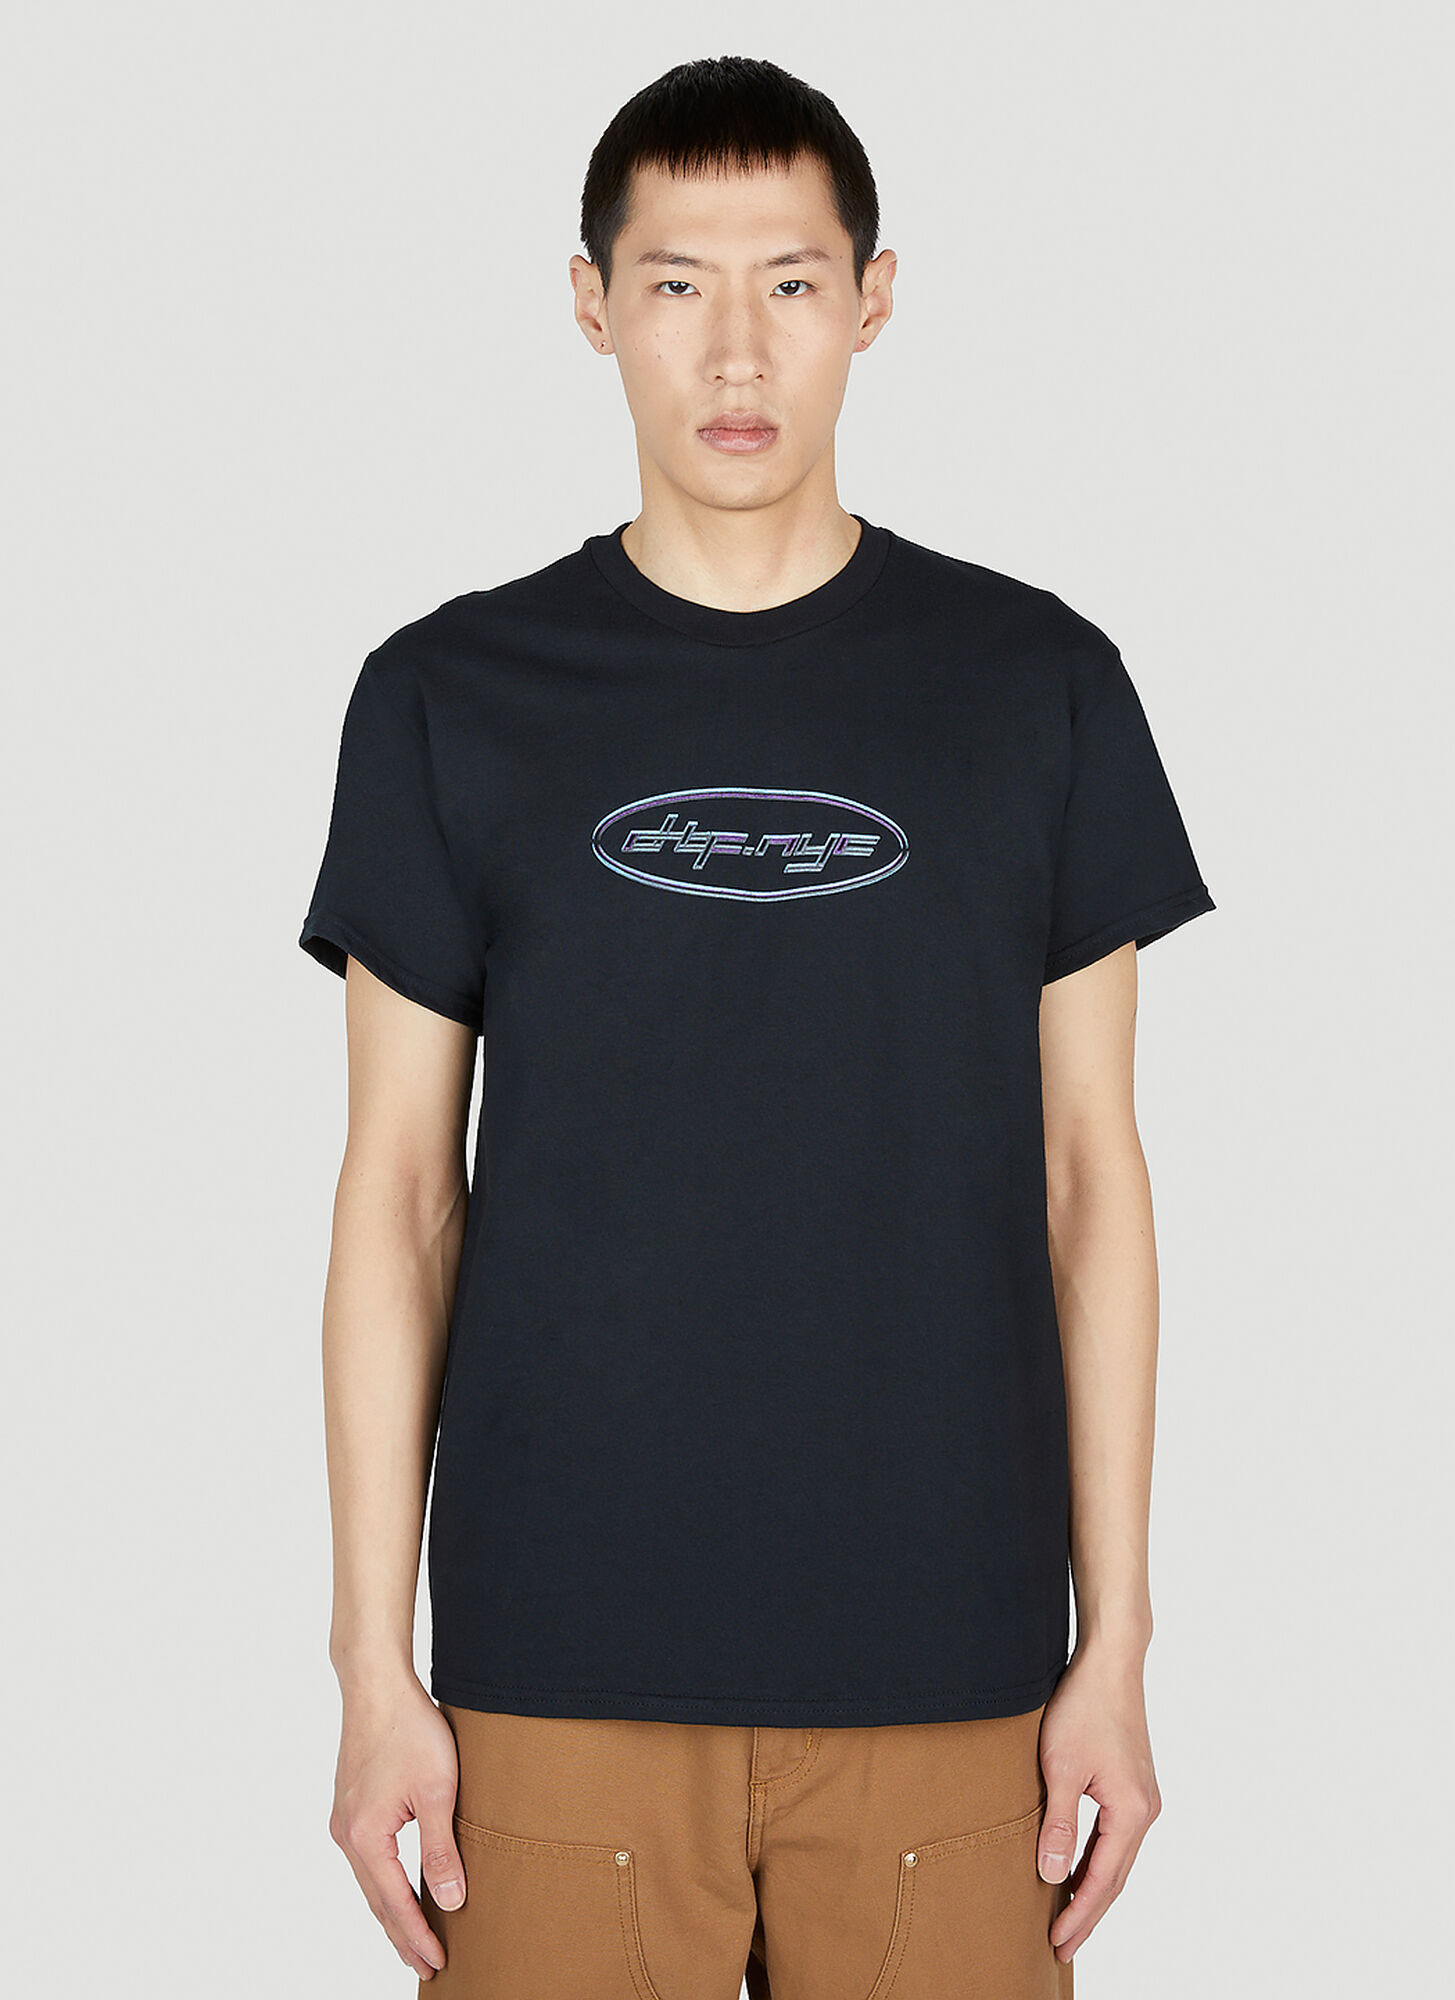 Dtf.nyc Cyber Logo Short-sleeved T-shirt In Black